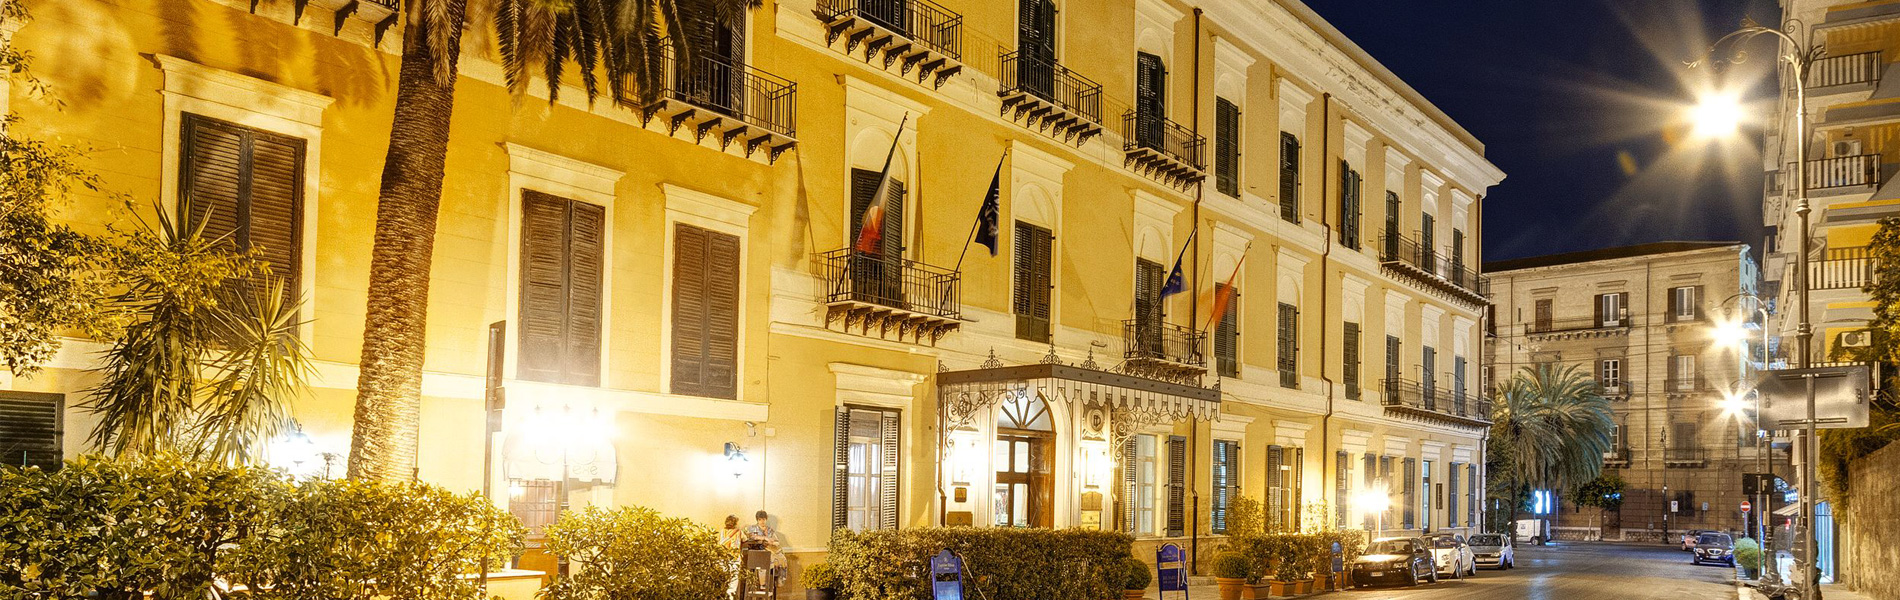 Excelsior Palace Palermo exterior